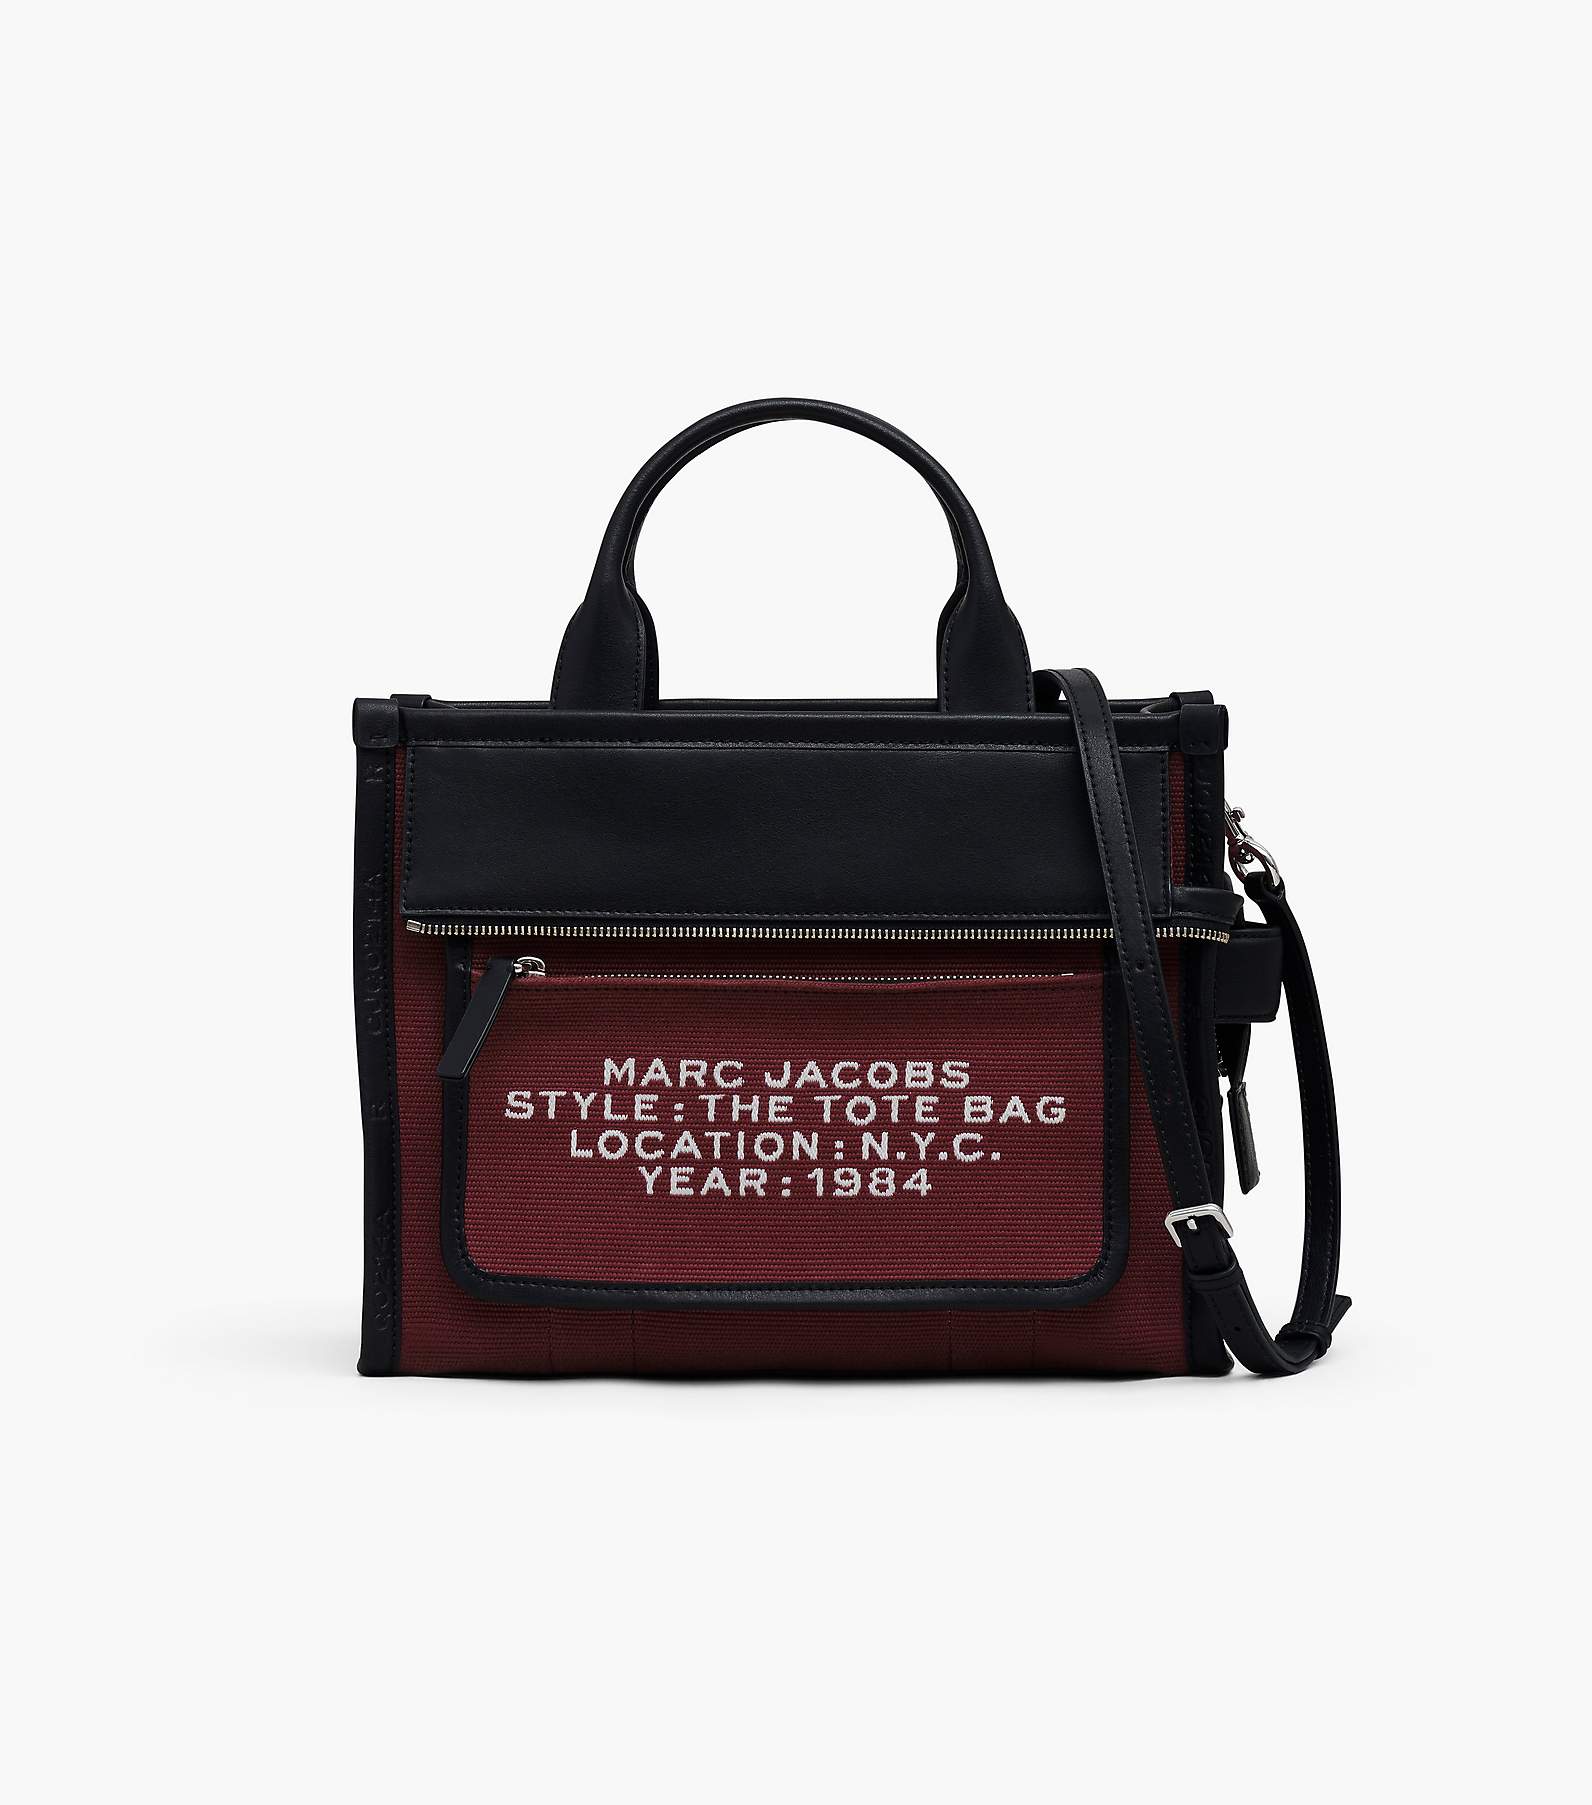 Marc Jacobs Marc Jacobs (the) Medium Cherry Leather Tote Bag in